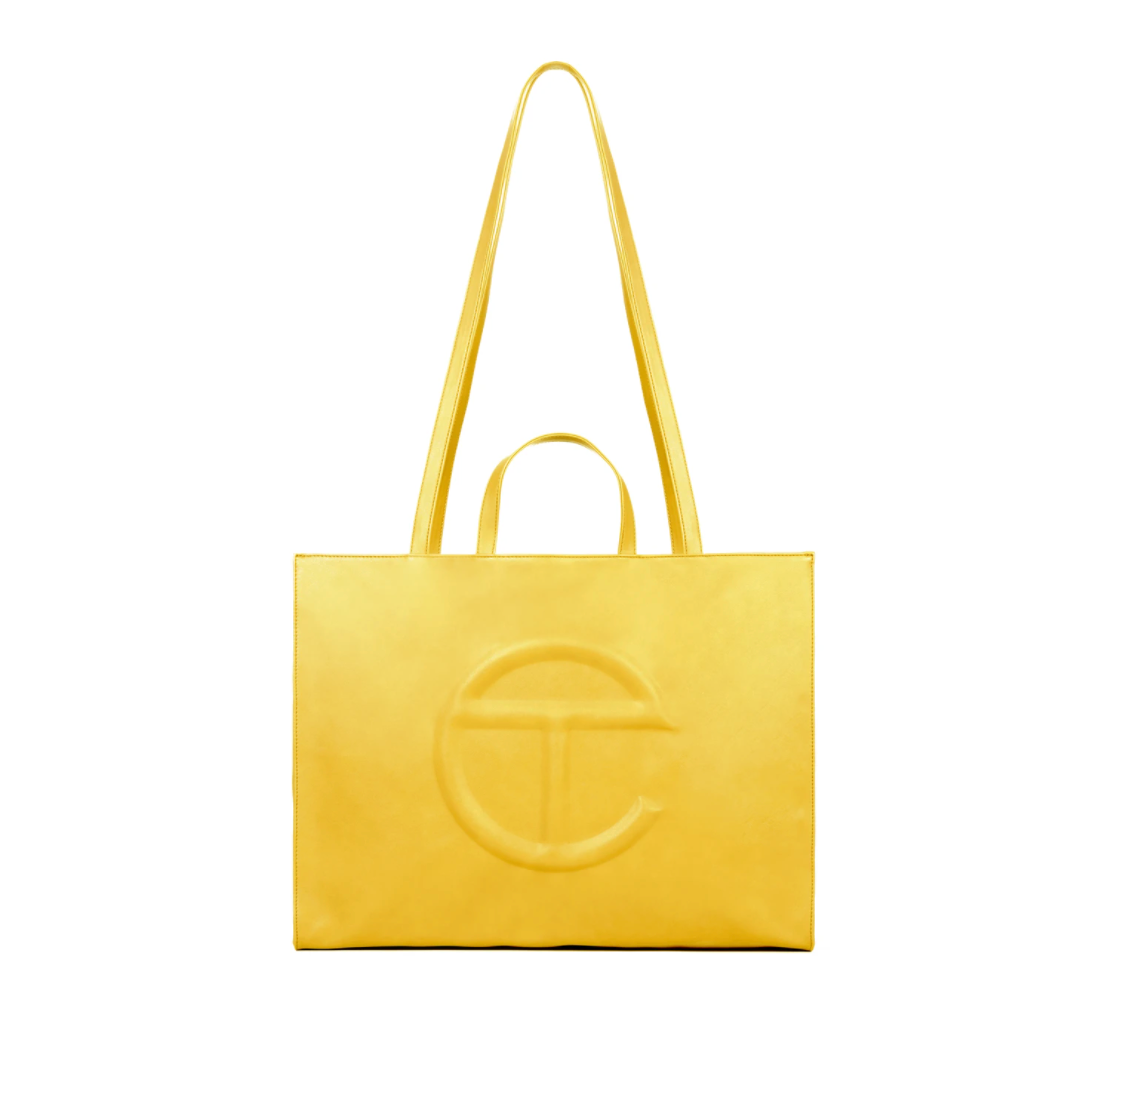 Telfar’s iconic Shopping Bag comes in three sizes and sells out in minutes. Image: Courtesy of Telfar